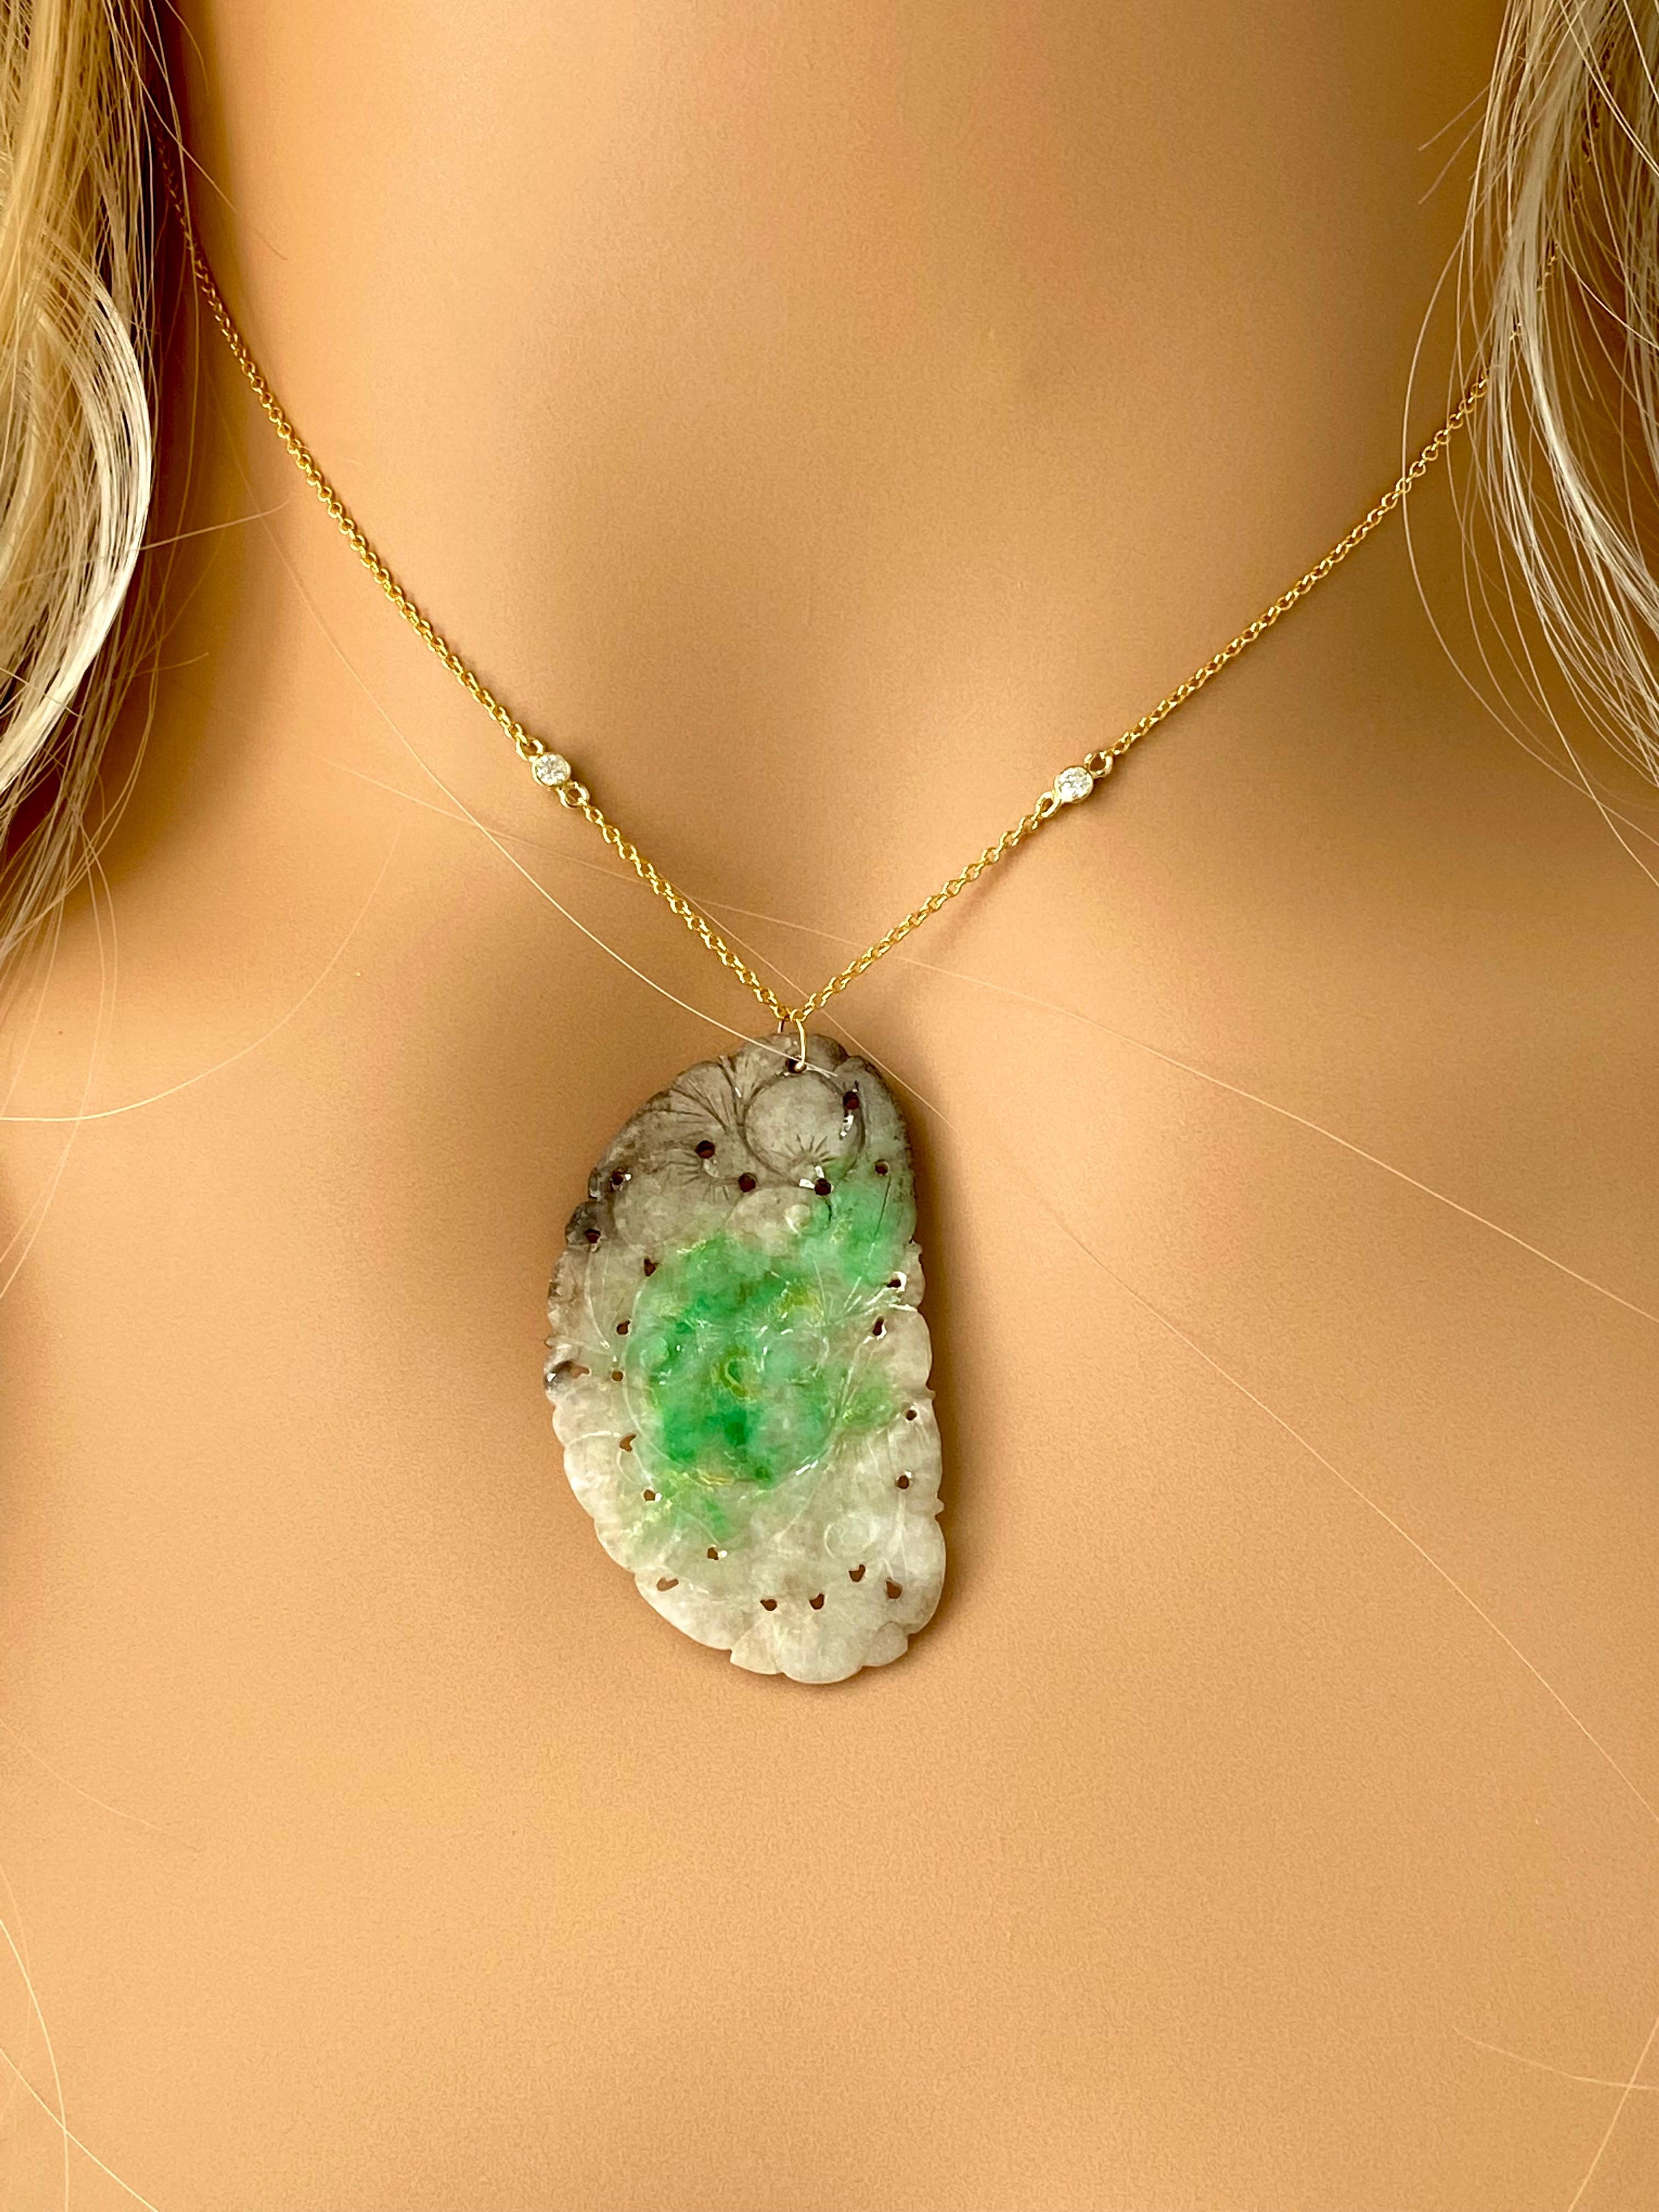 A vintage carved jade button pendant
Old Chinese natural apple jade carvings necklace pendant
Hand assembles and handmade into 14 Karat white and yellow gold diamond station necklace
The jade stones are carved in a light botanical pattern and are